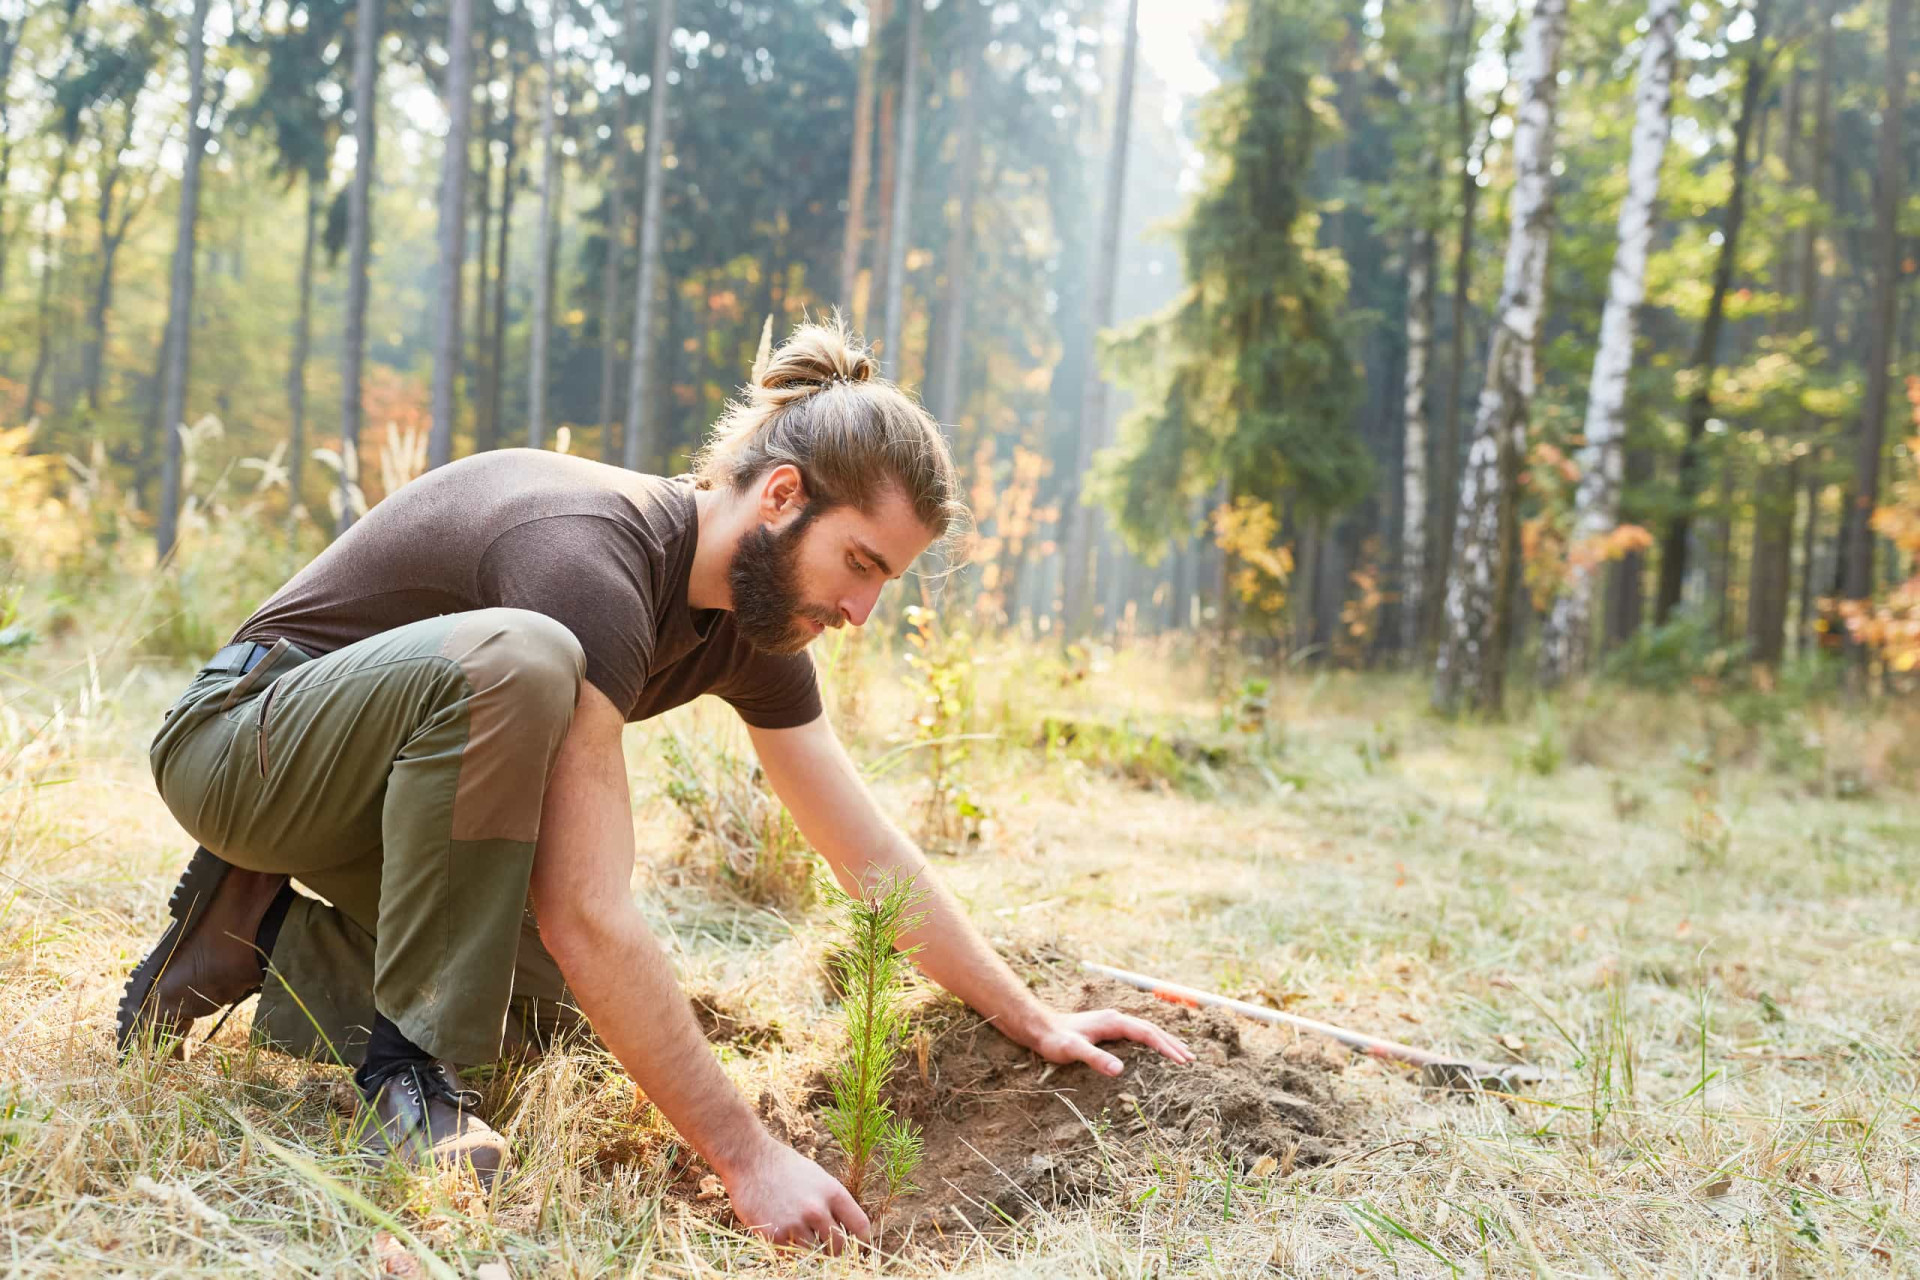 <p>Responsibilities that come with this position include caring for, planting, and managing trees or forests, sometimes in wilderness areas where the only company is a bear, or two!</p><p><a href="https://www.msn.com/en-us/community/channel/vid-7xx8mnucu55yw63we9va2gwr7uihbxwc68fxqp25x6tg4ftibpra?cvid=94631541bc0f4f89bfd59158d696ad7e">Follow us and access great exclusive content every day</a></p>